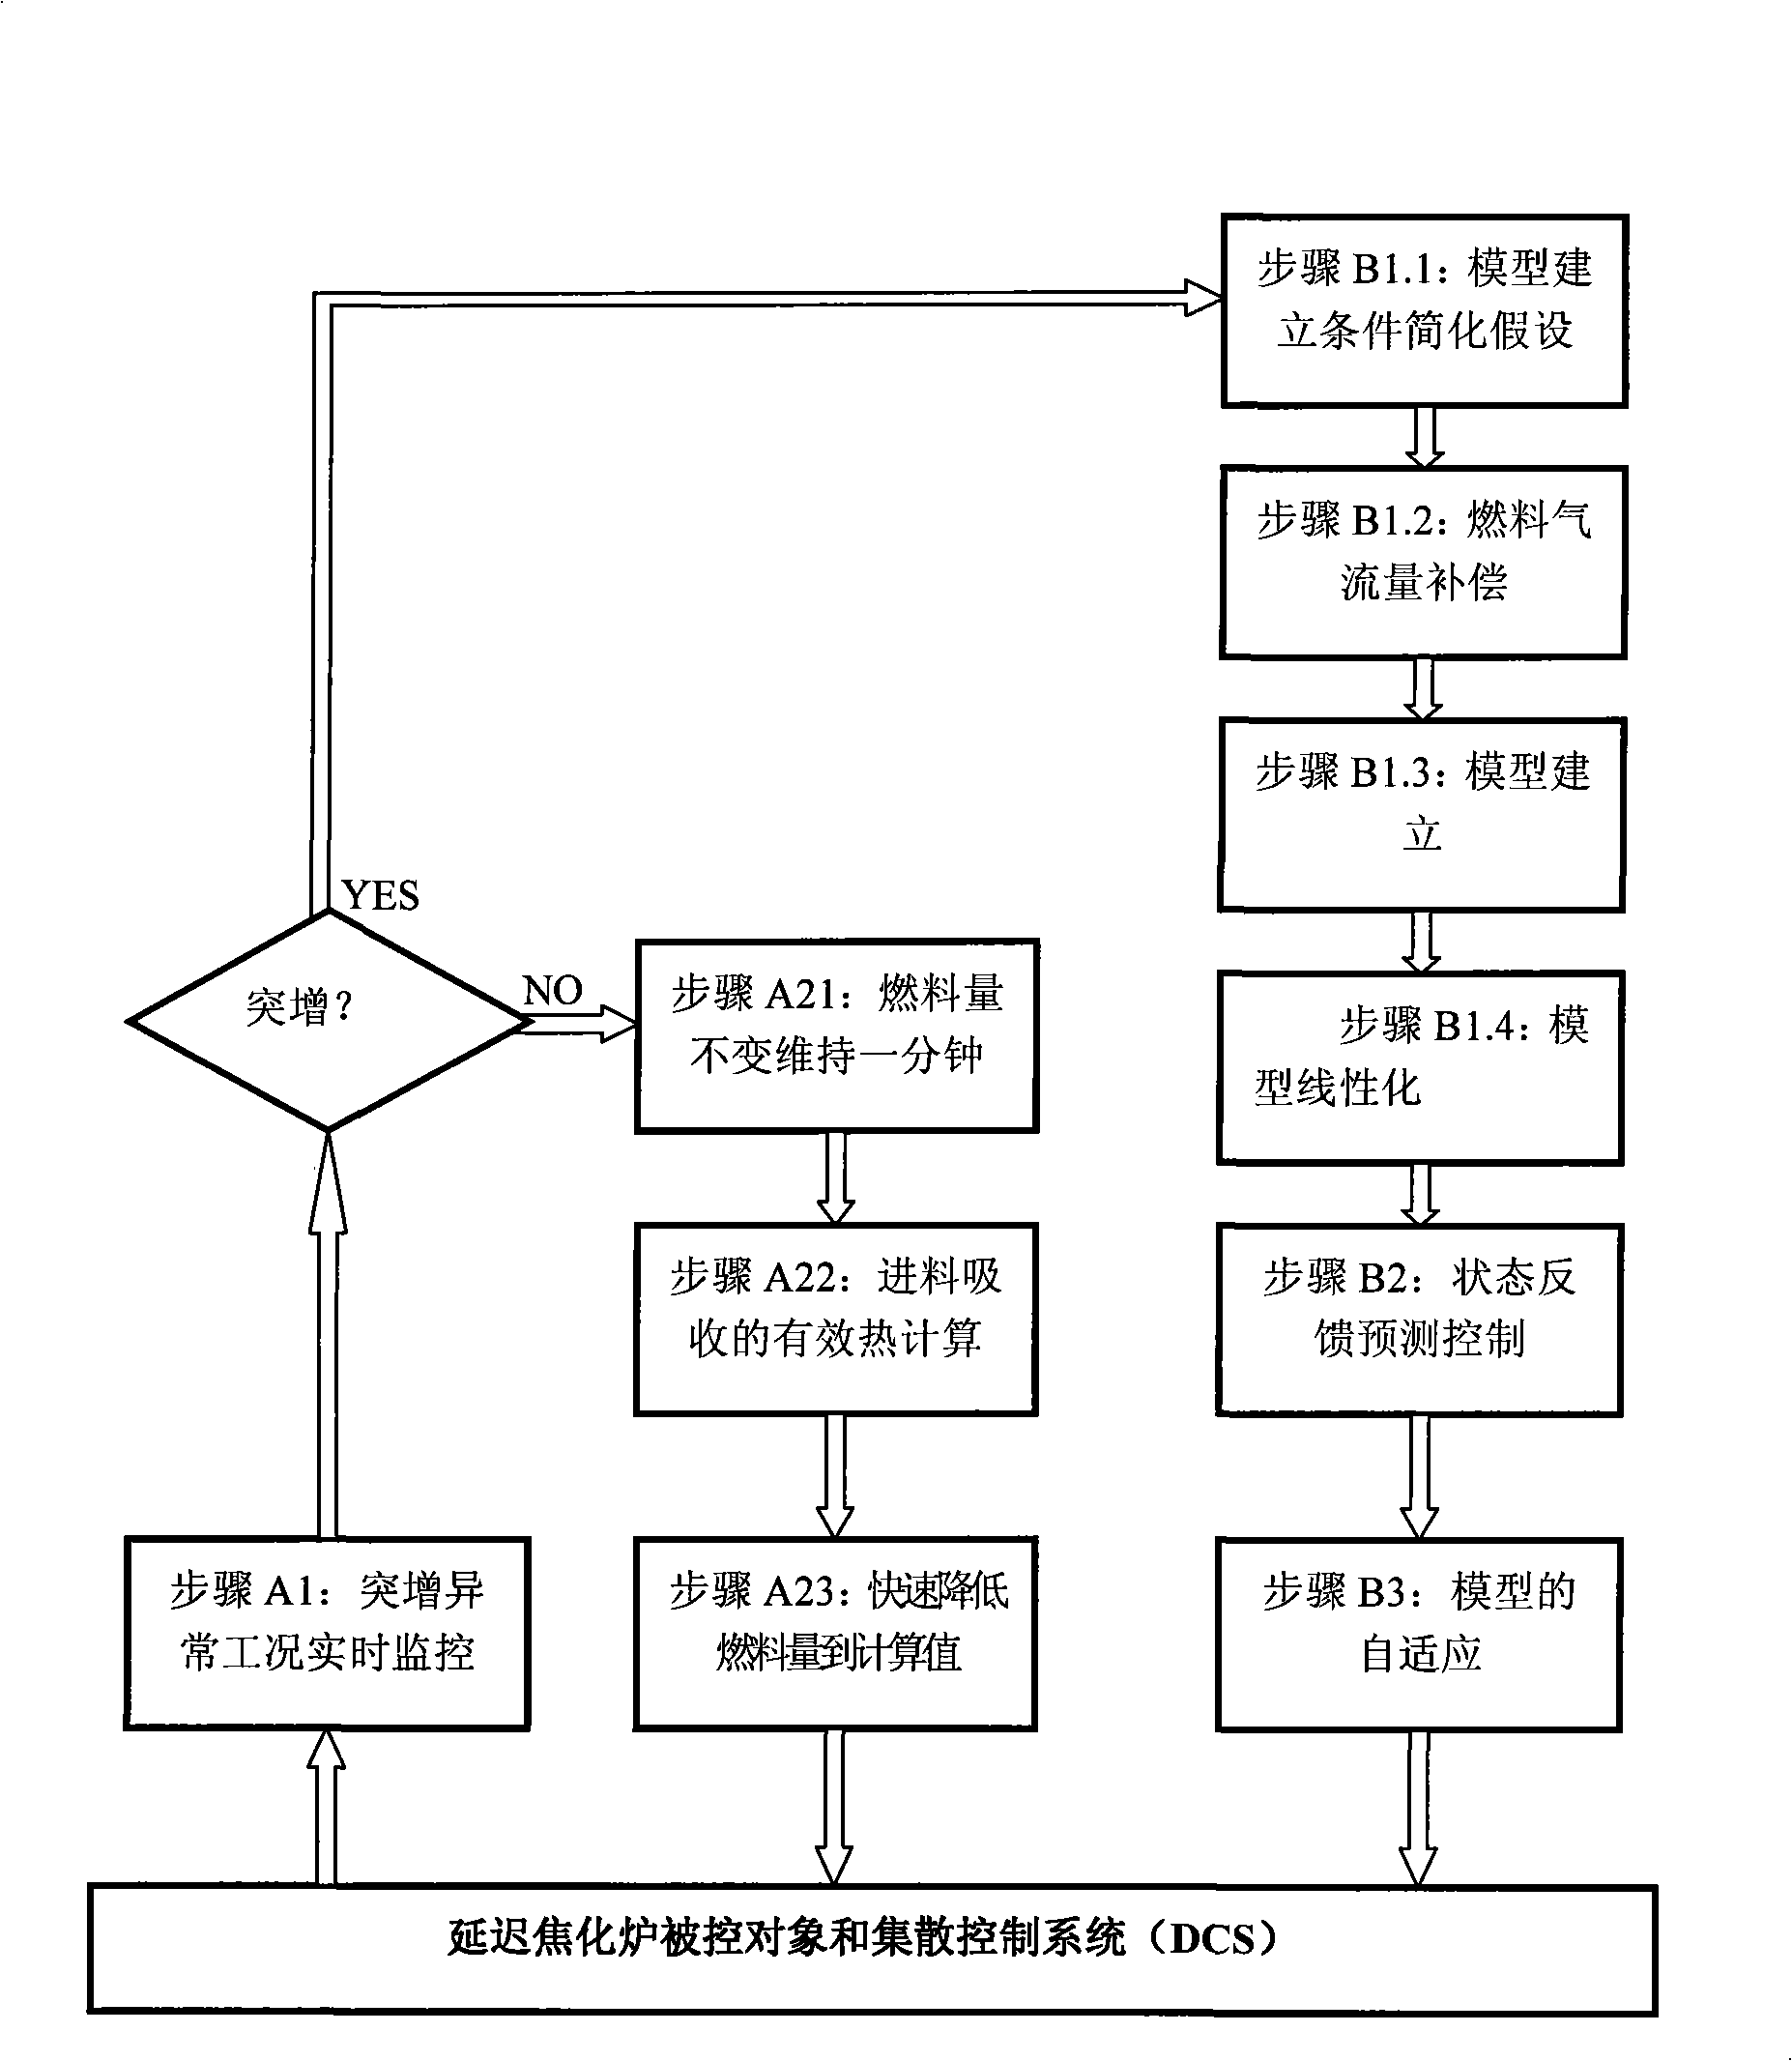 Control method for delay coking stove